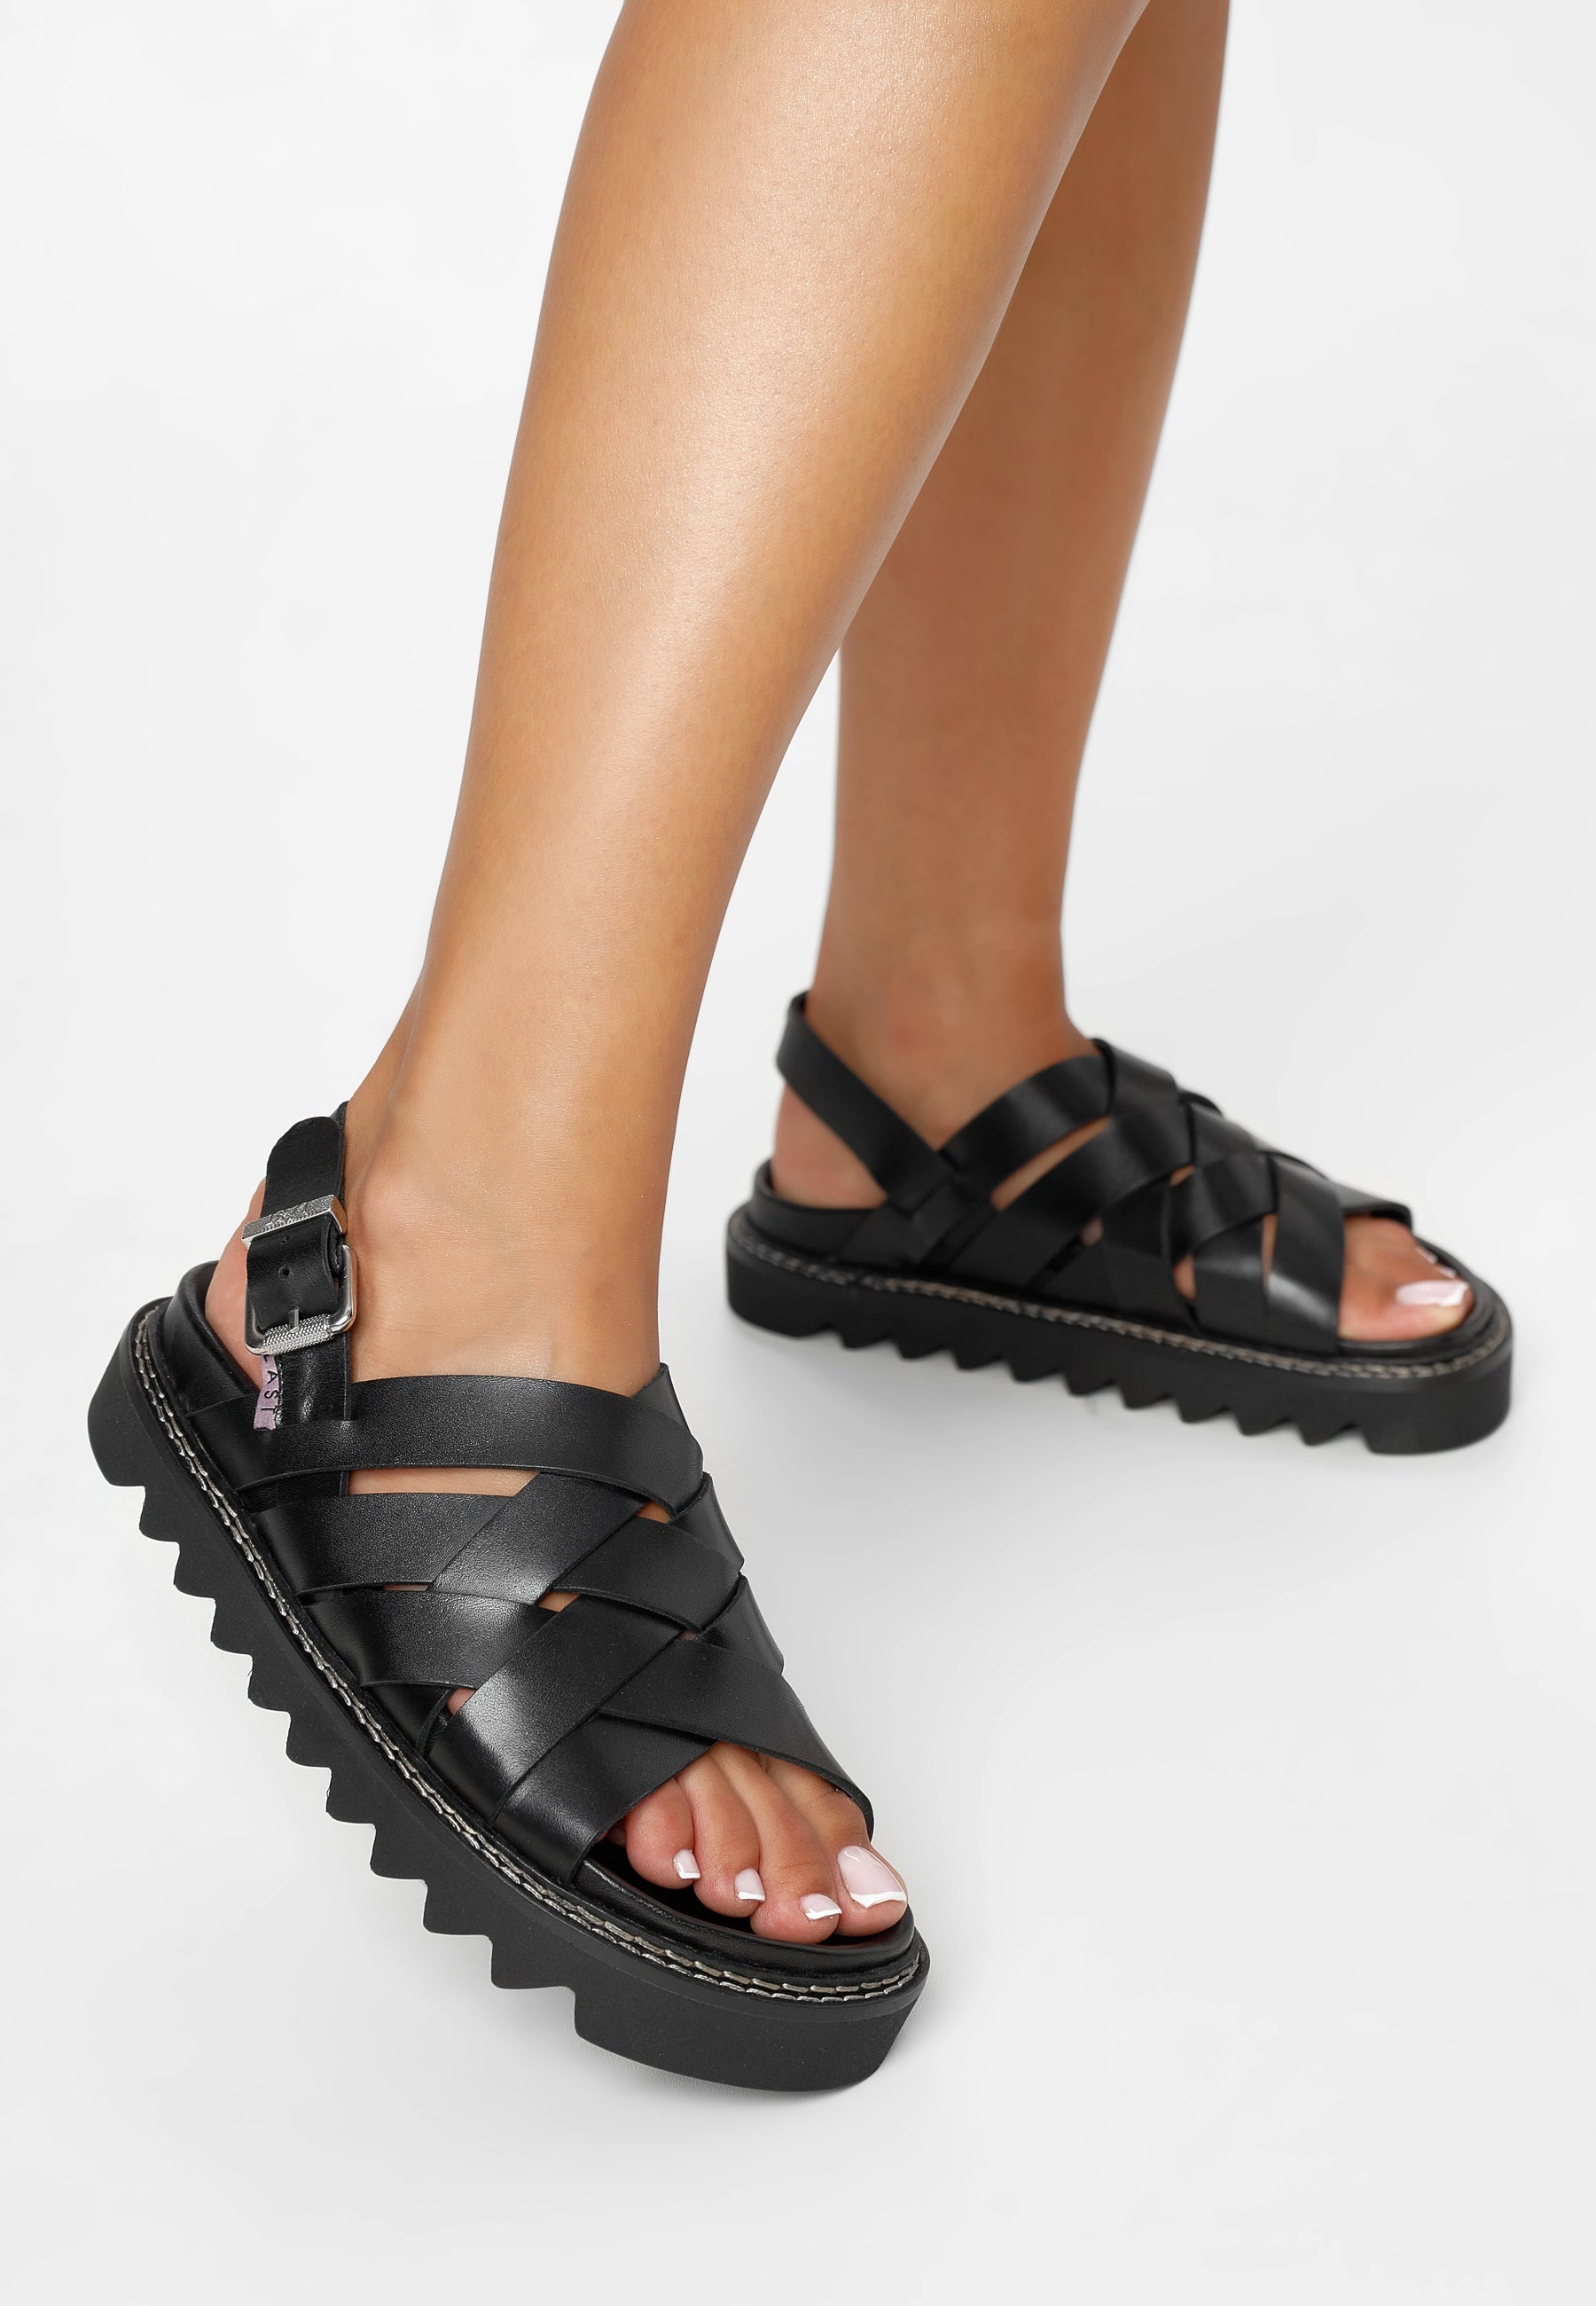 Maggie Black Leather Chunky Sandals LAST1553 - 11